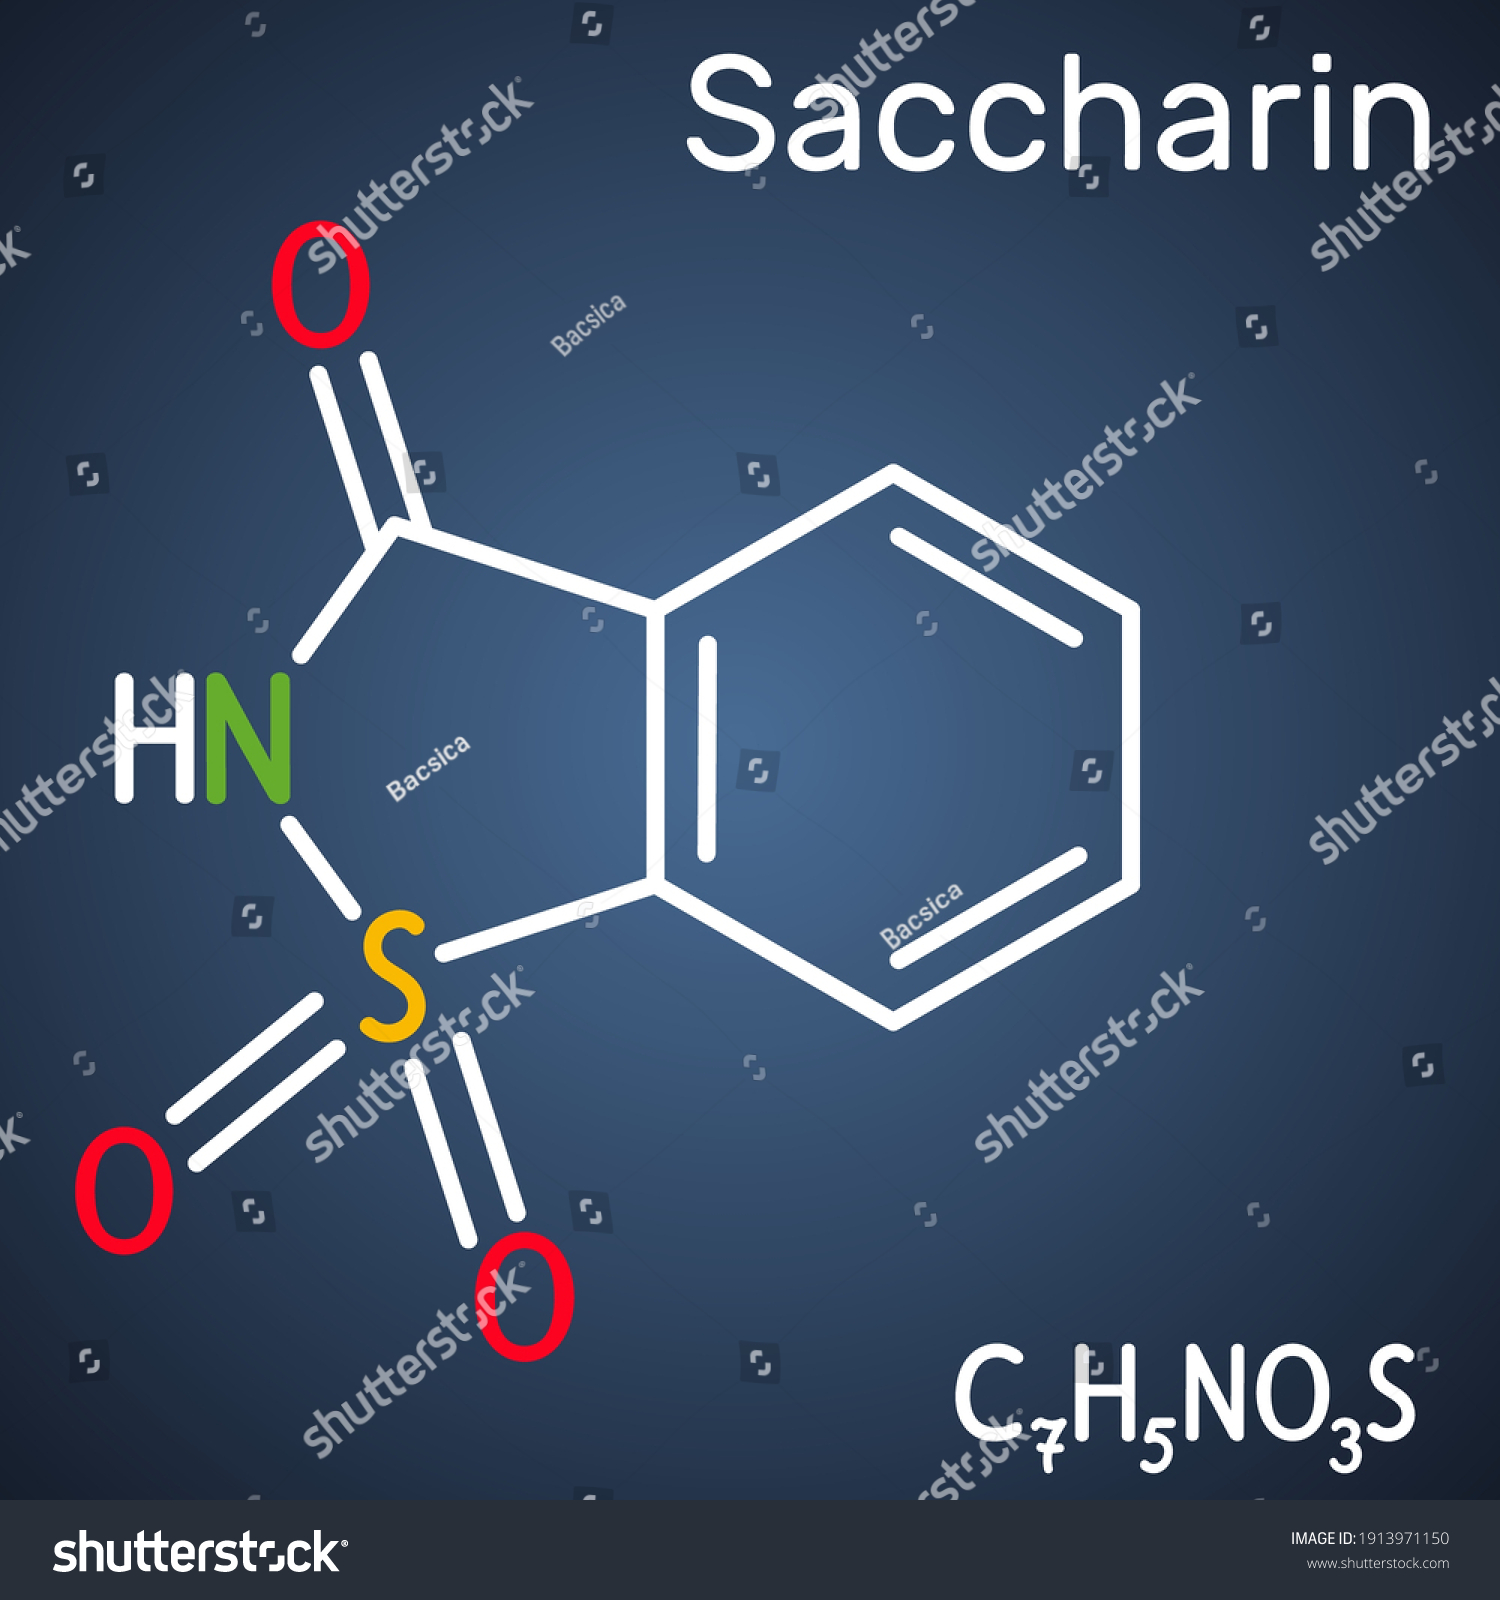 SVG of Saccharin molecule. It is artificial sweetener, sweetening agent, xenobiotic and environmental contaminant. Structural chemical formula on the dark blue background. Vector illustration svg